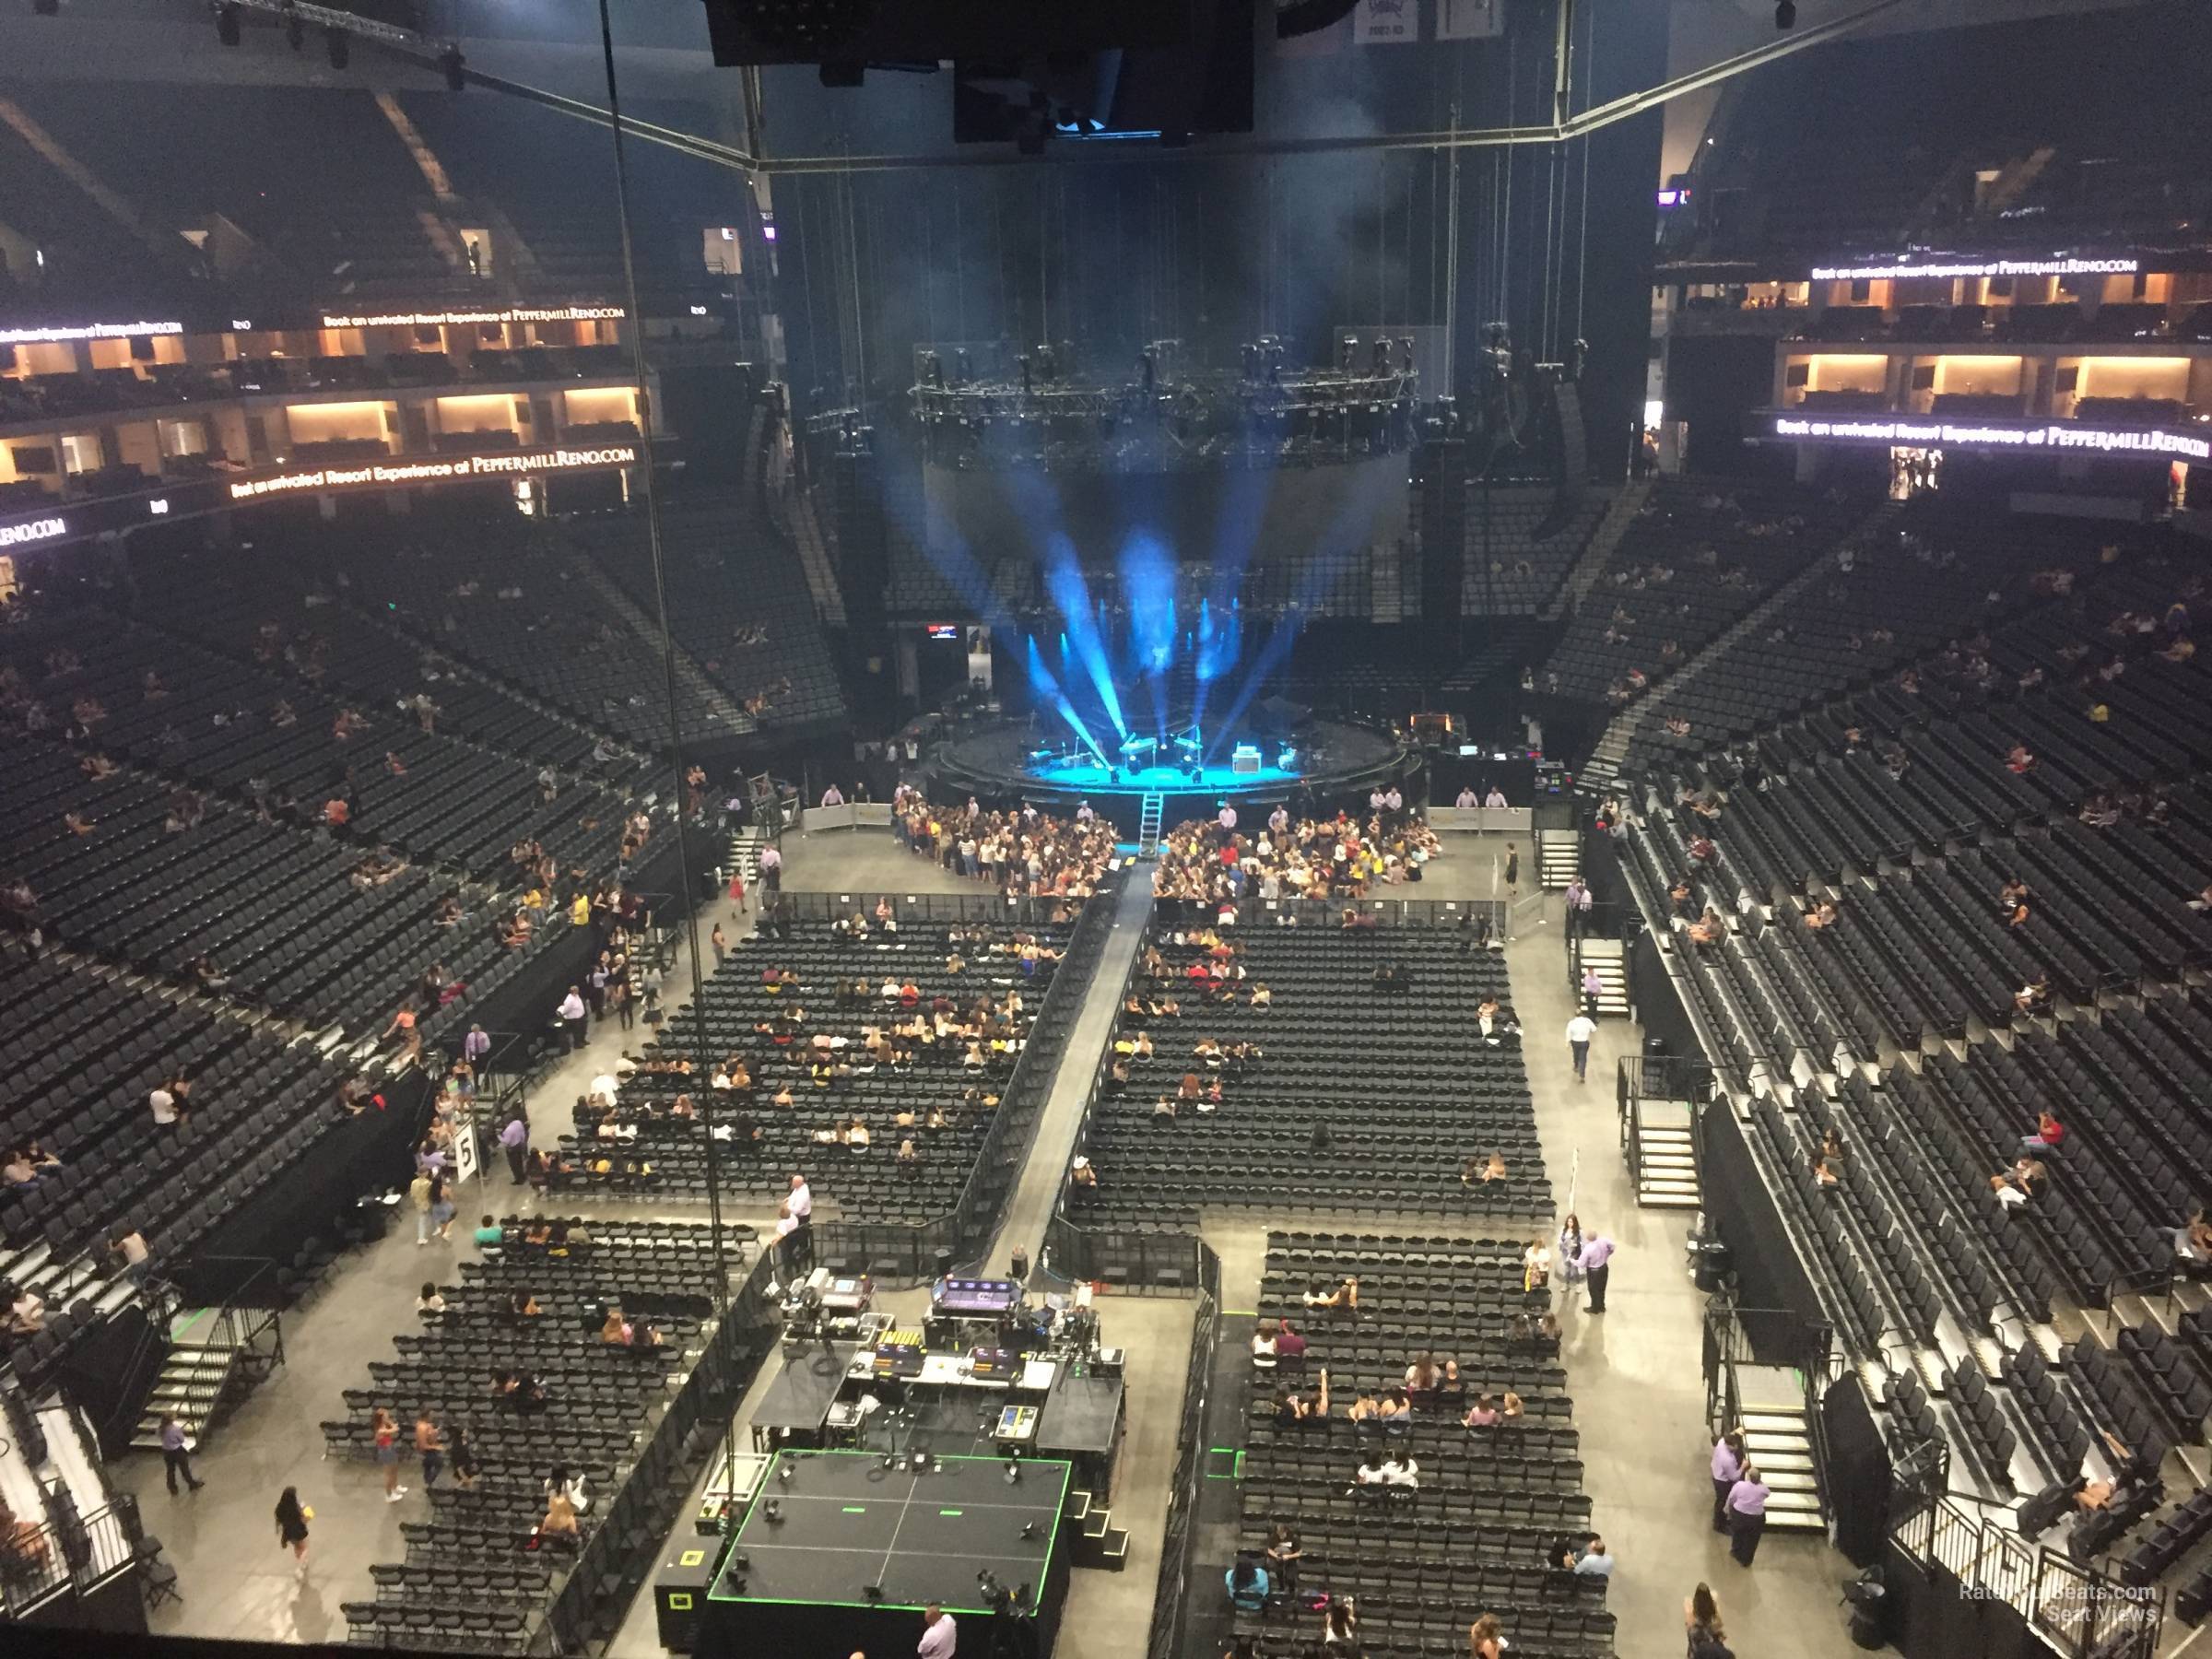 Section 211 at Golden 1 Center - RateYourSeats.com